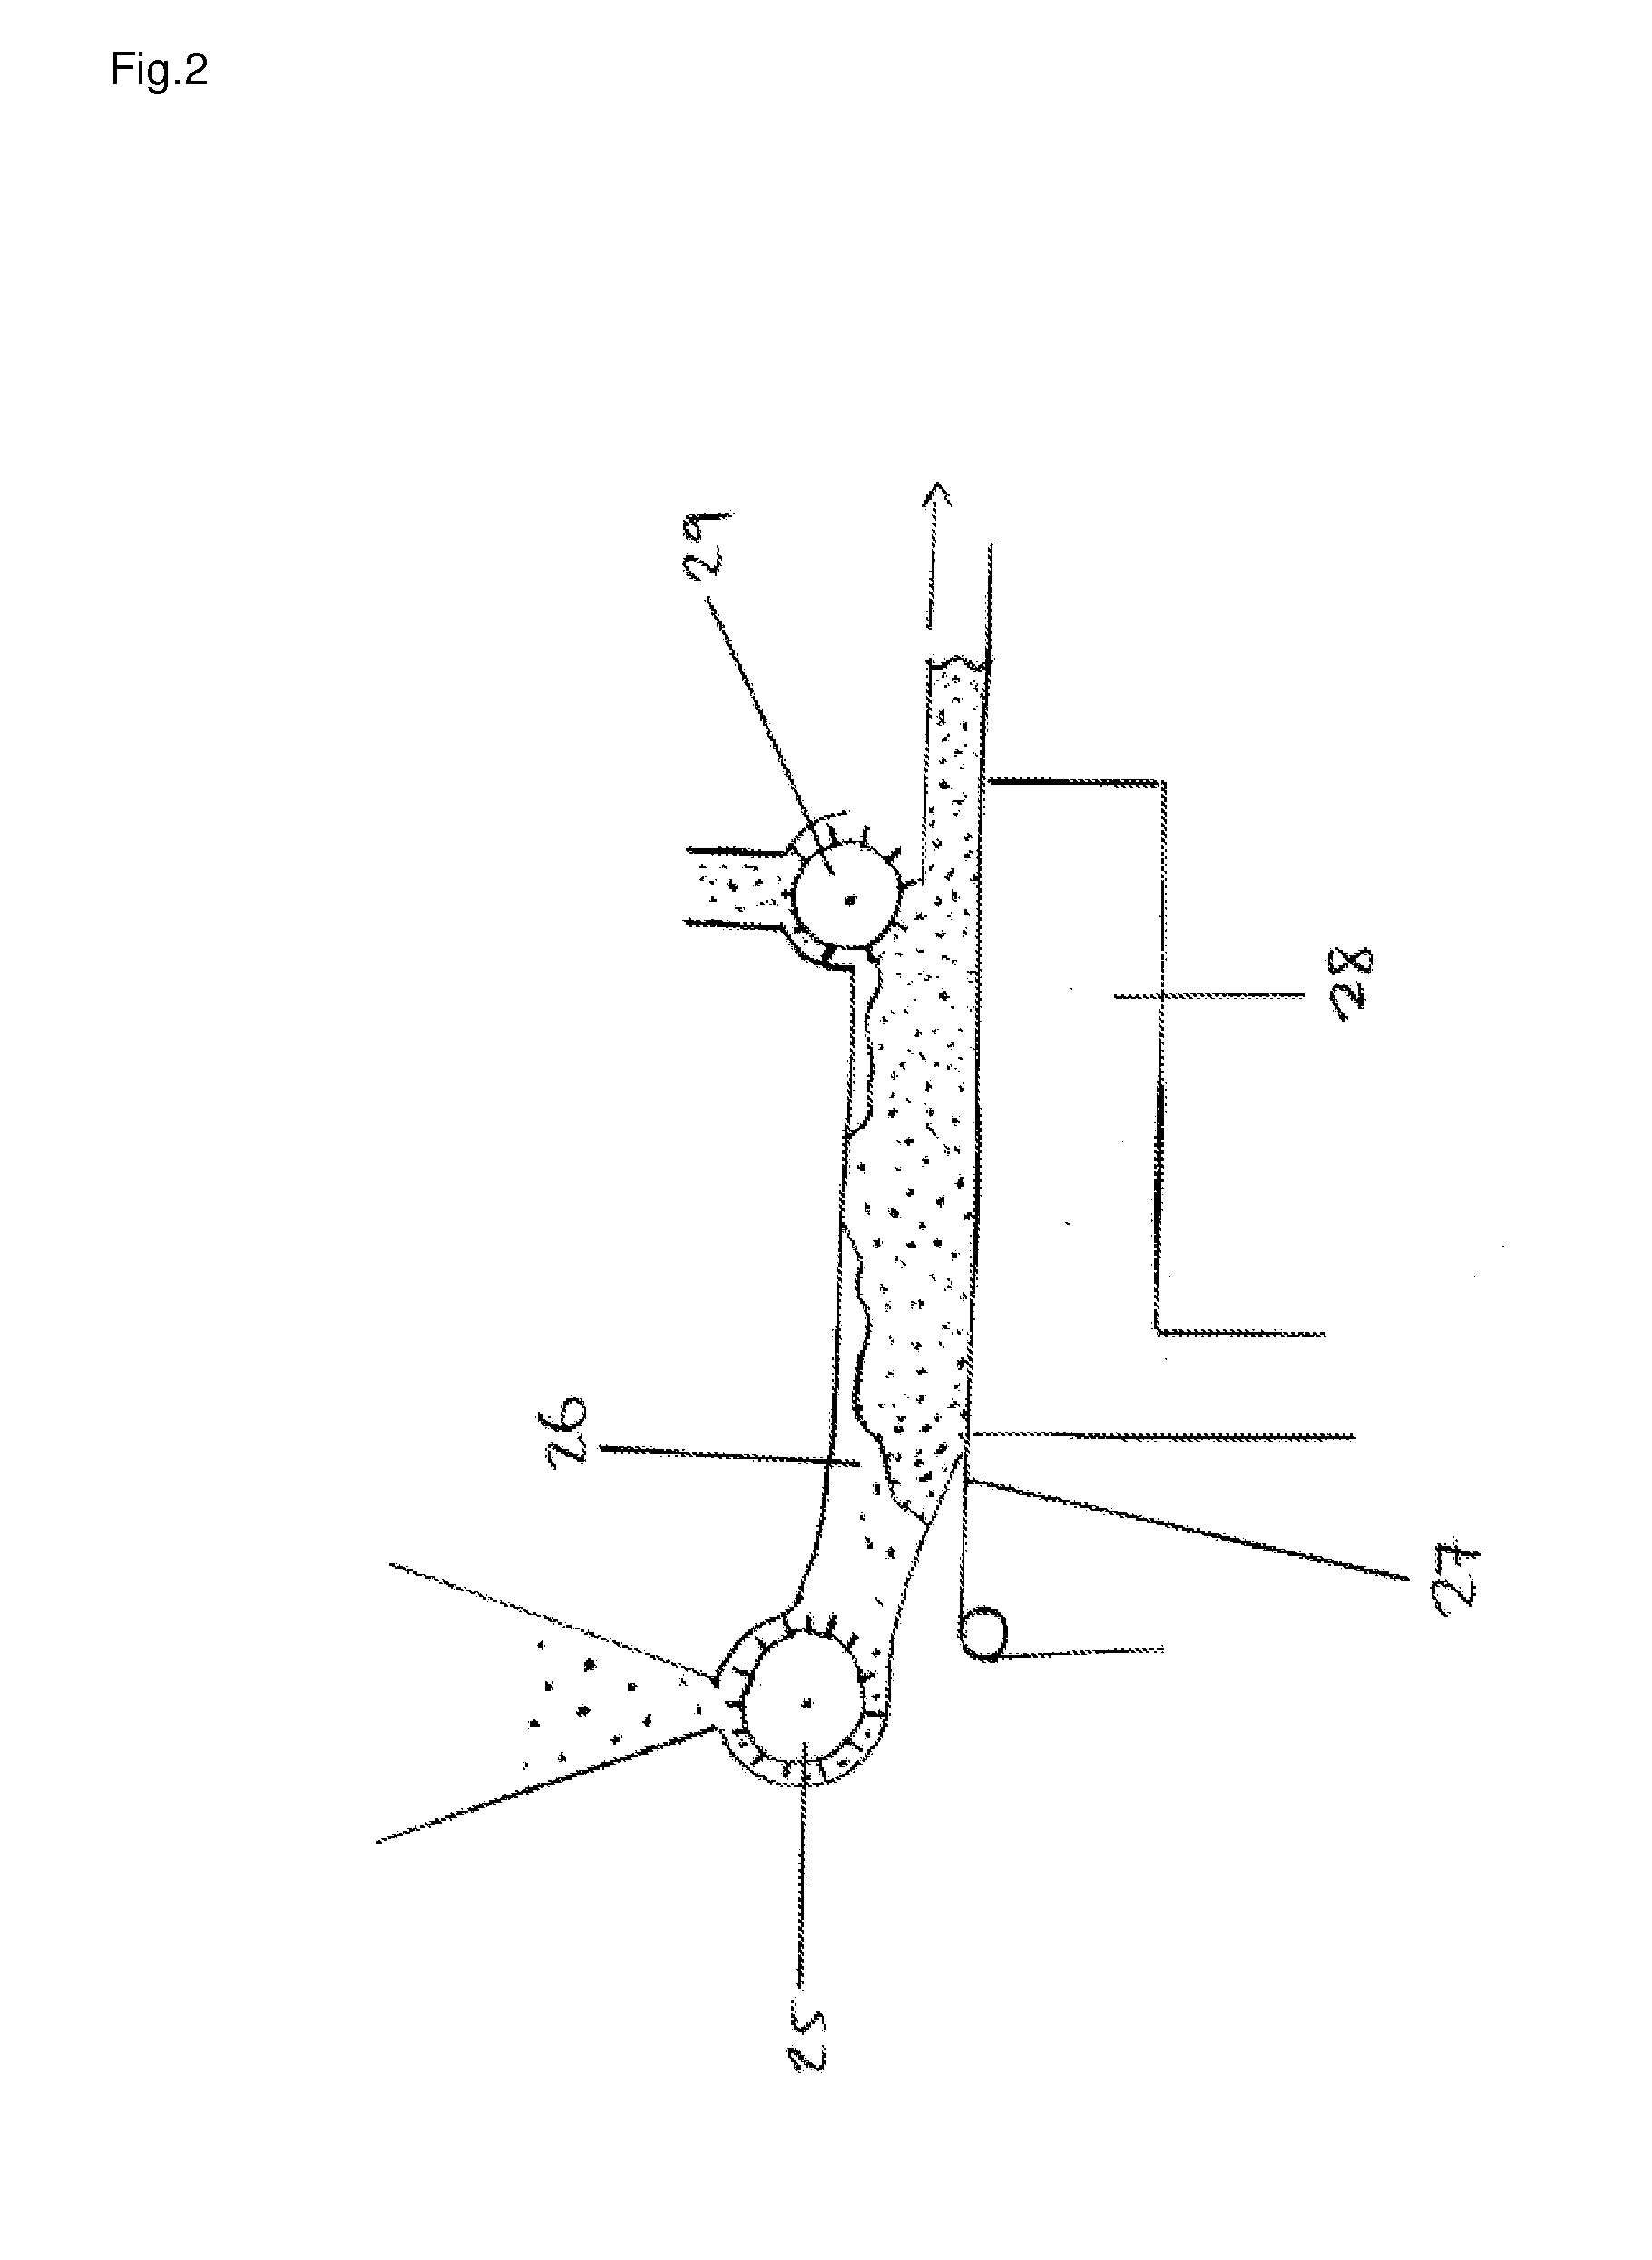 Method for manufacturing a mineral fiber-containing element and element produced by that method